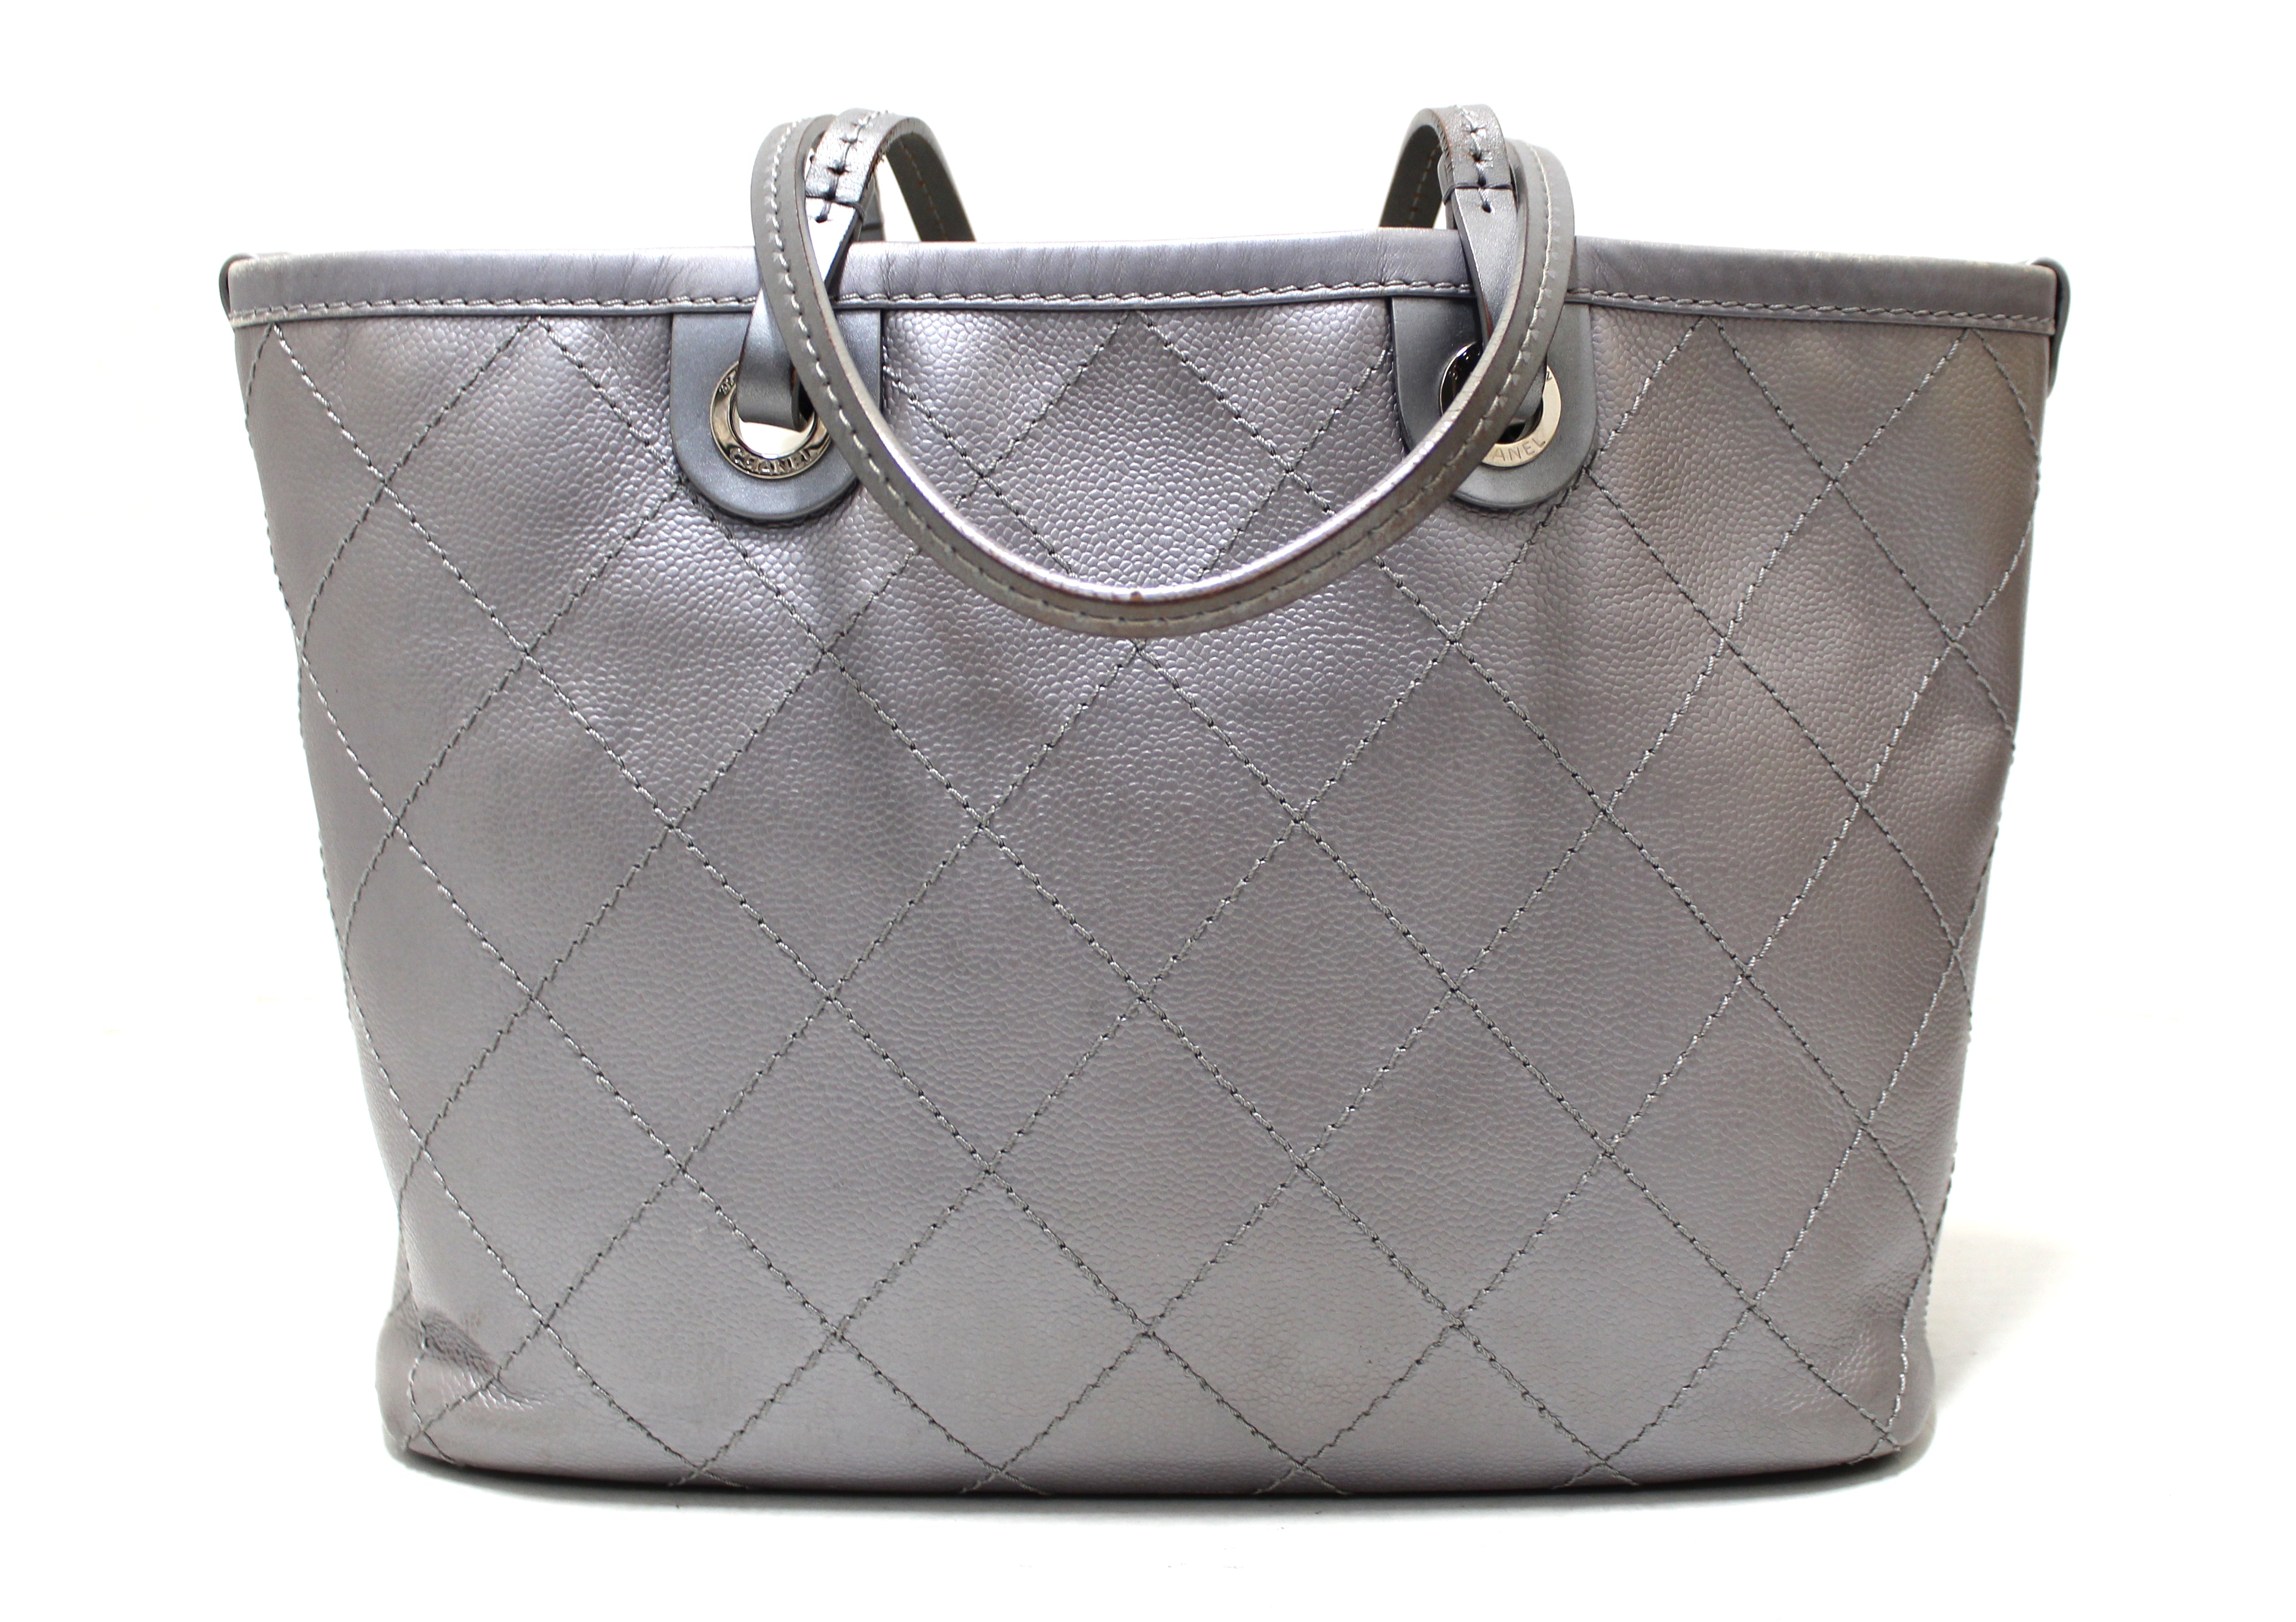 Authentic Chanel Silver Fever Caviar Quilted Shoulder Tote Bag